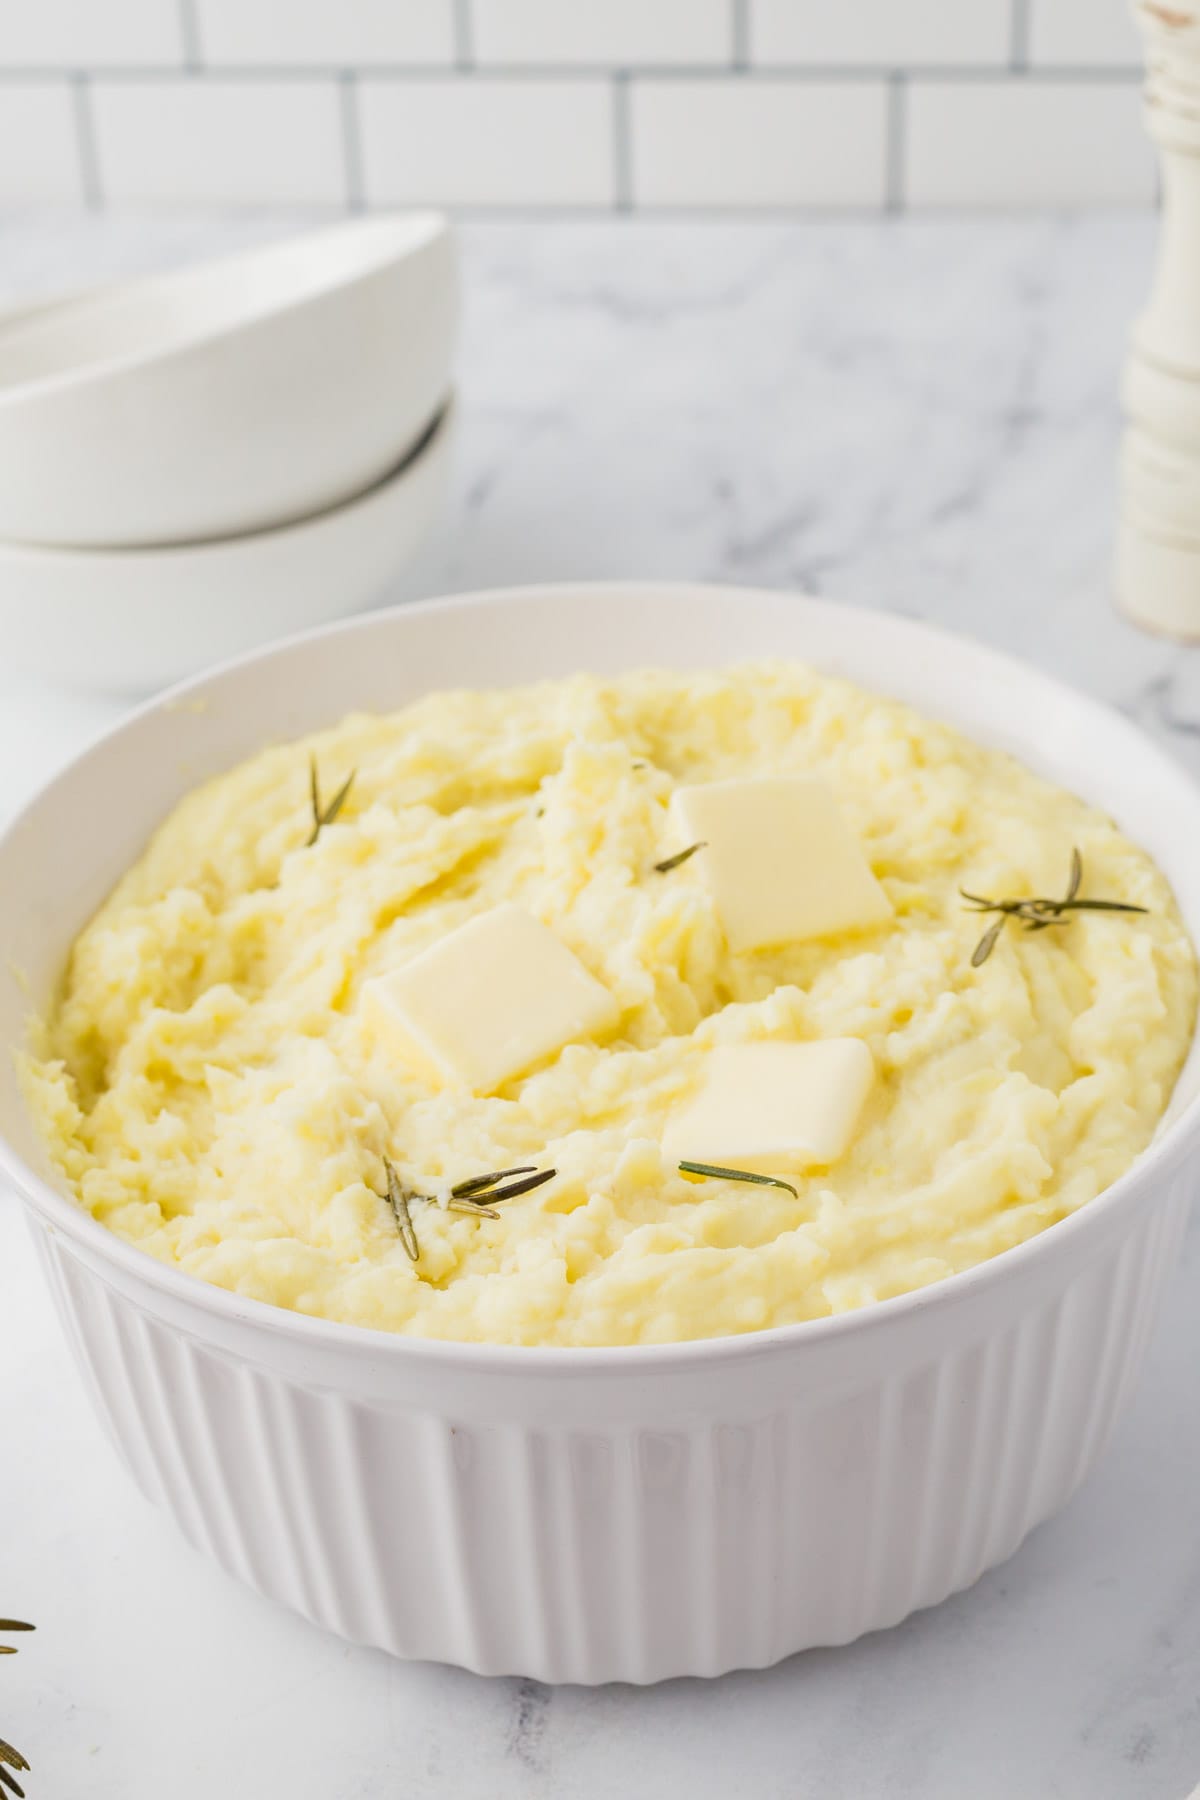 Mashed potatoes in a white bowl with butter and rosemary.